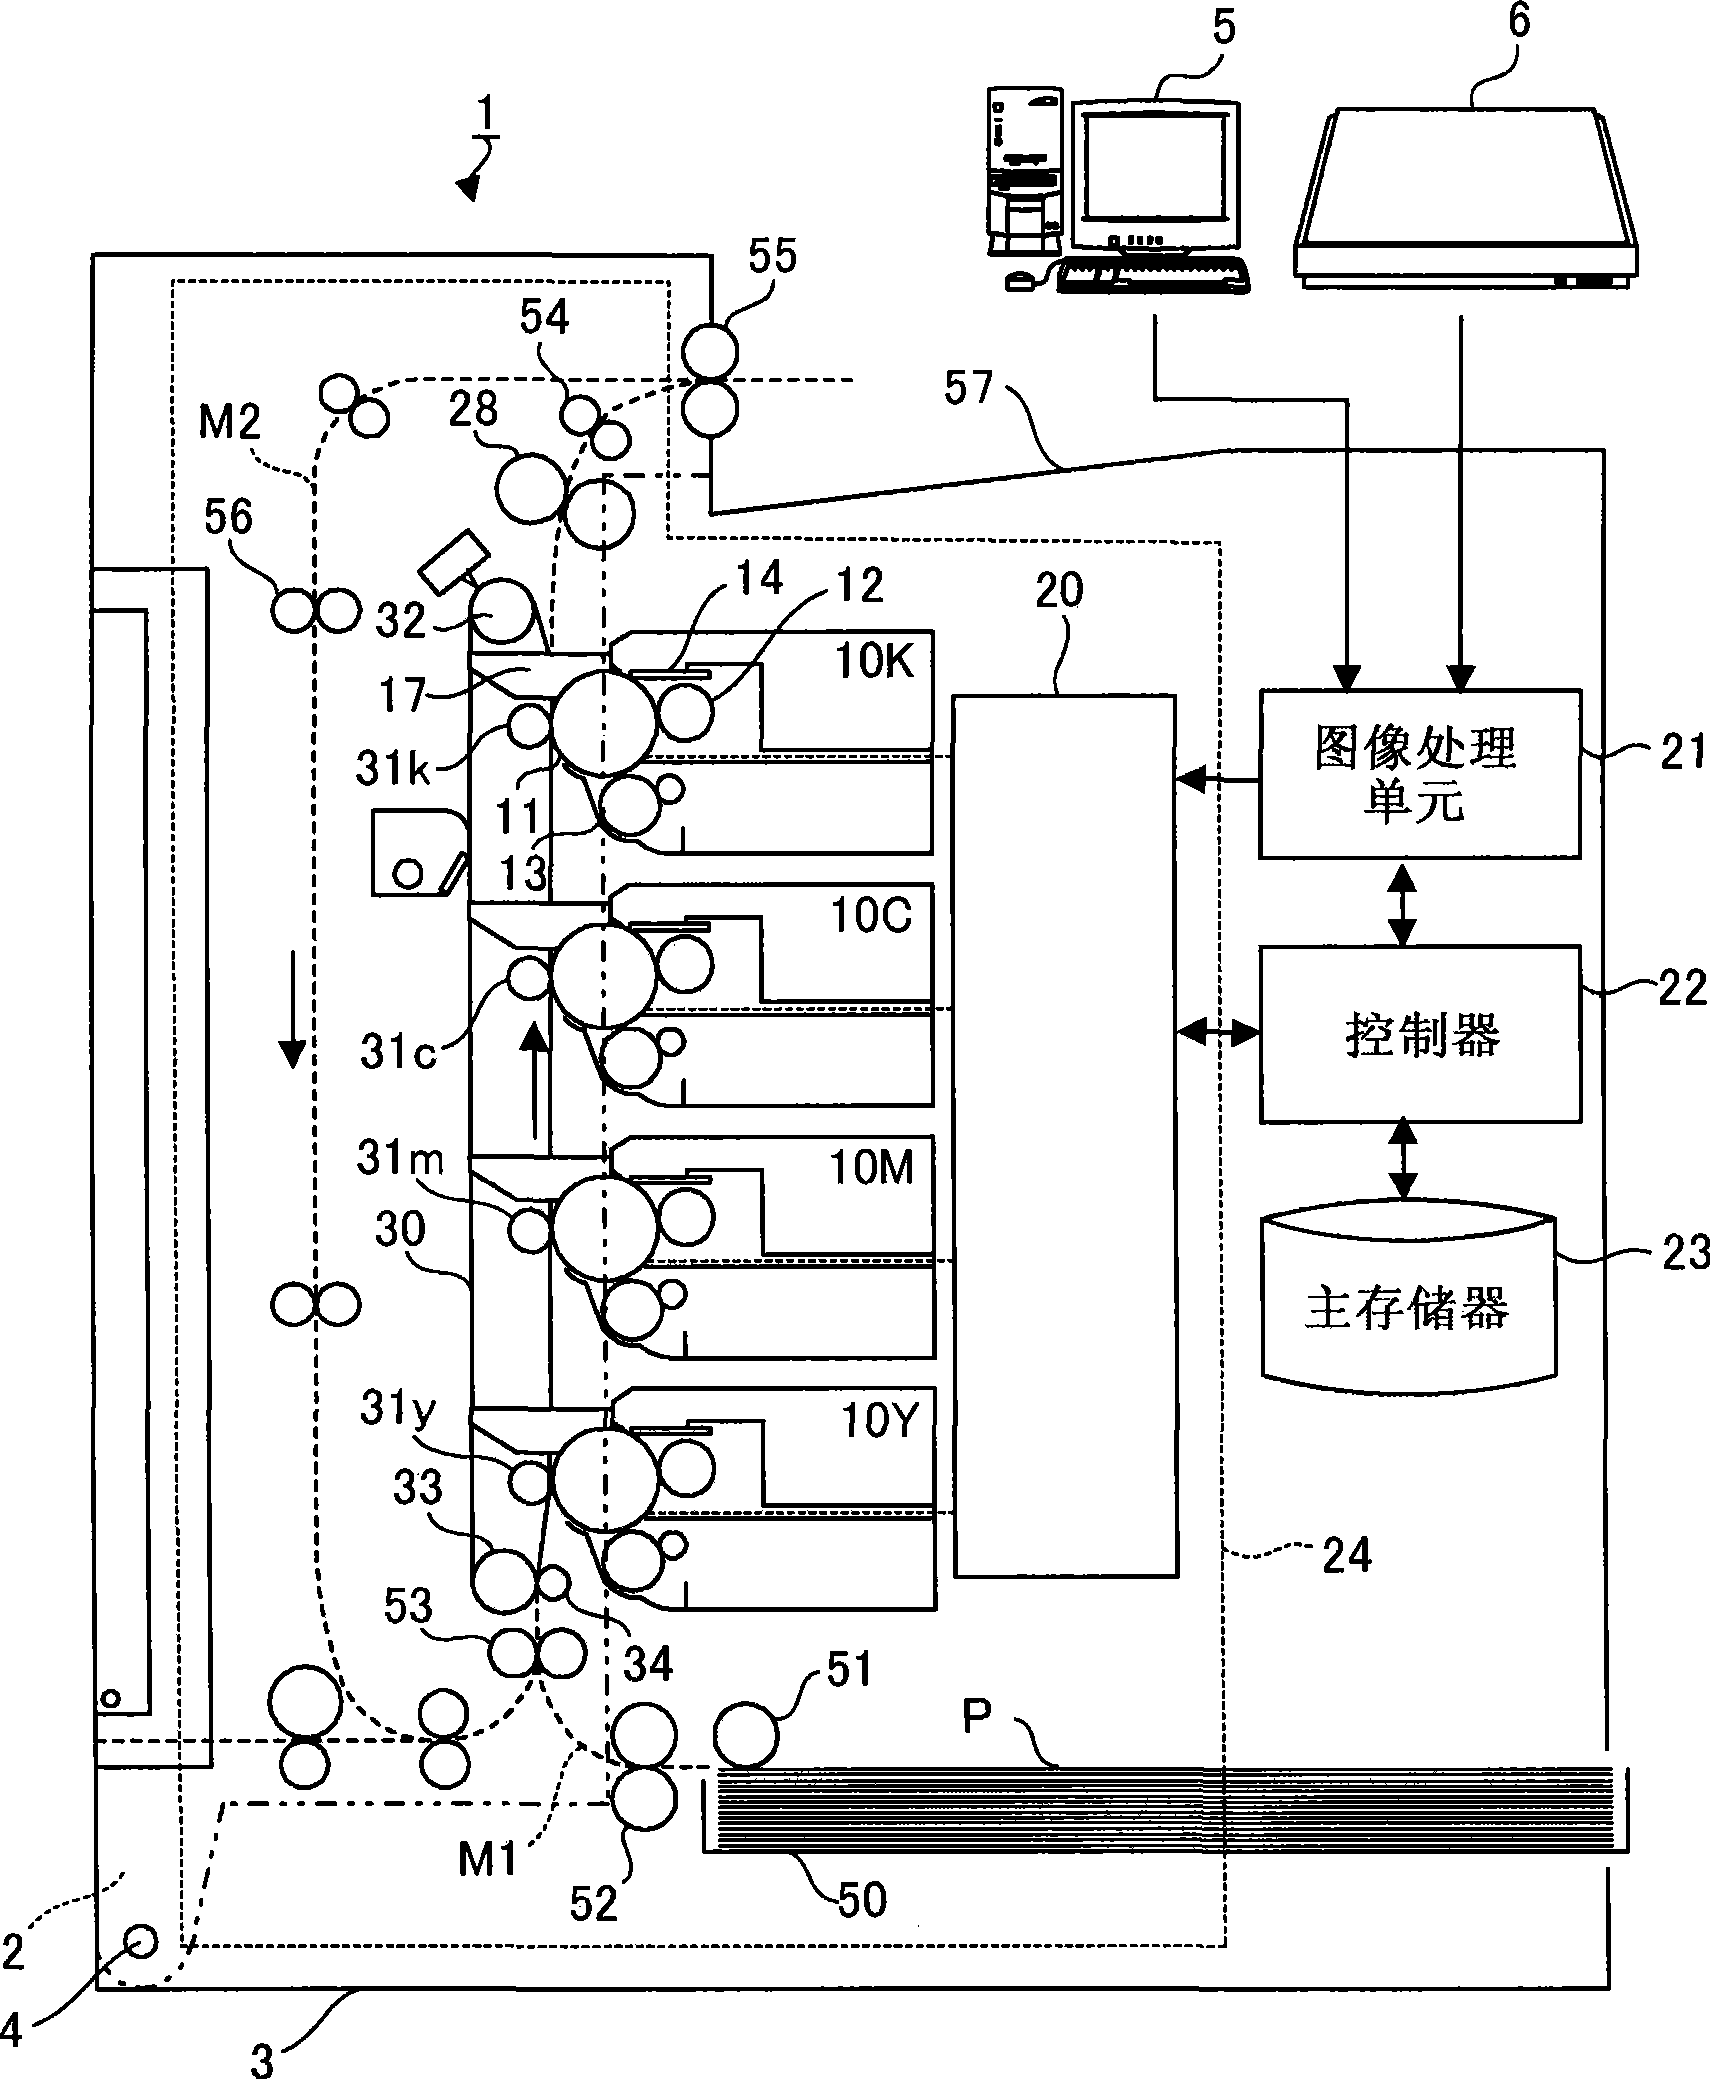 Image forming apparatus and drive converting method